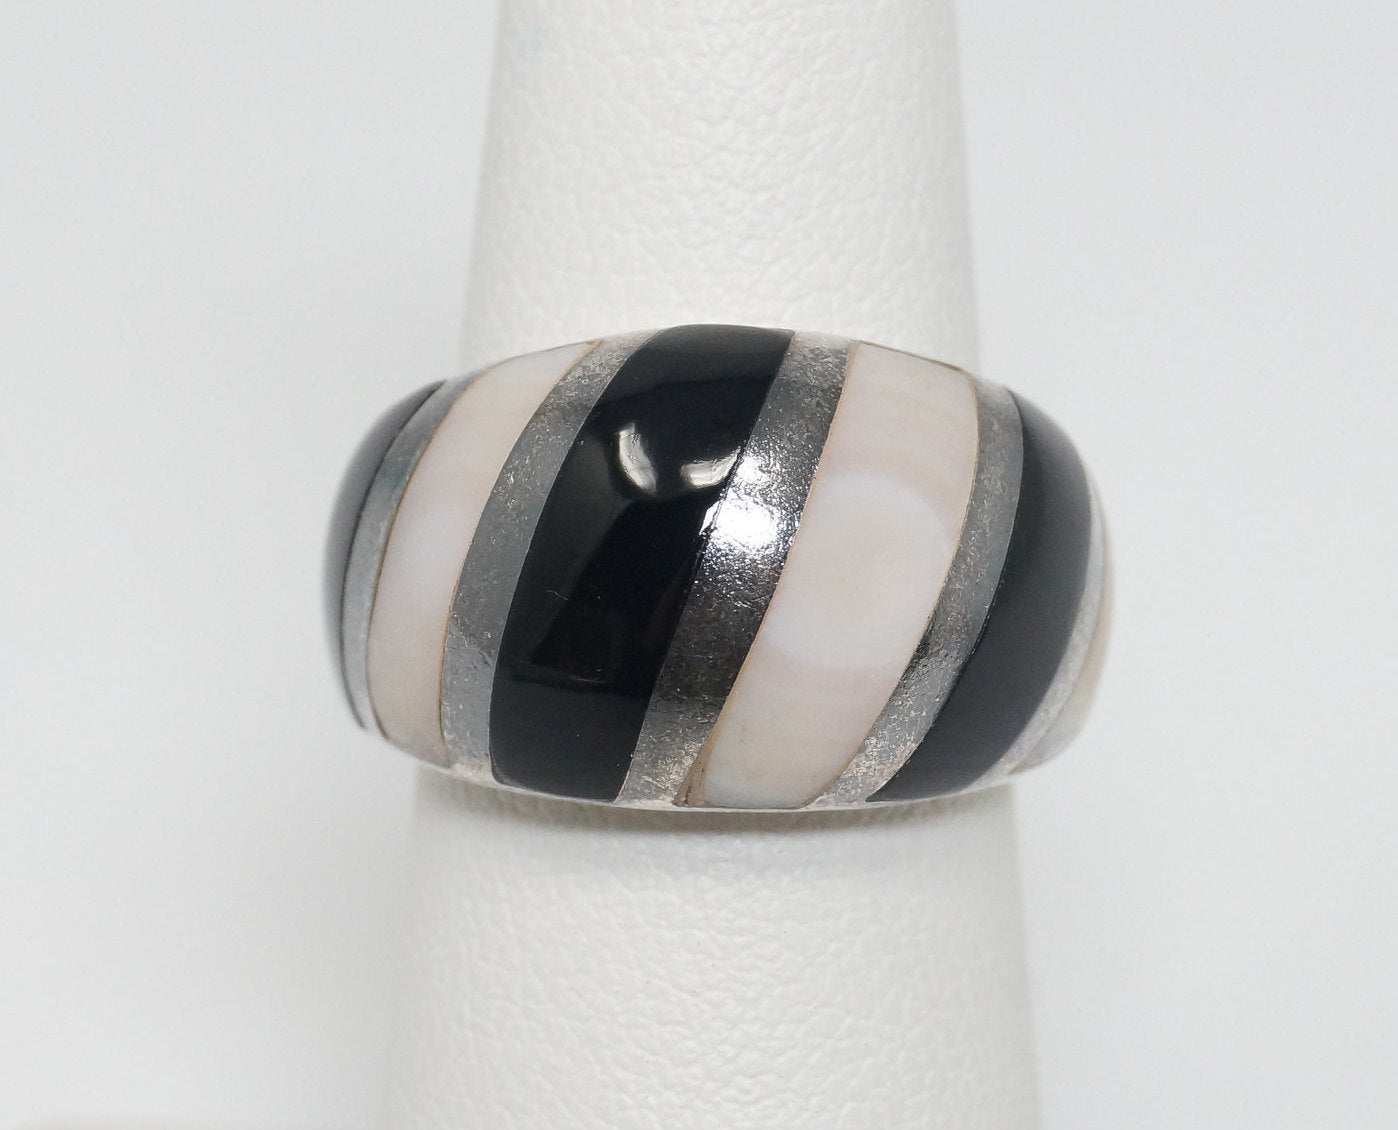 Vintage Mother Of Pearl Black Onyx Art Deco Style Sterling Silver Ring - SZ 5.75